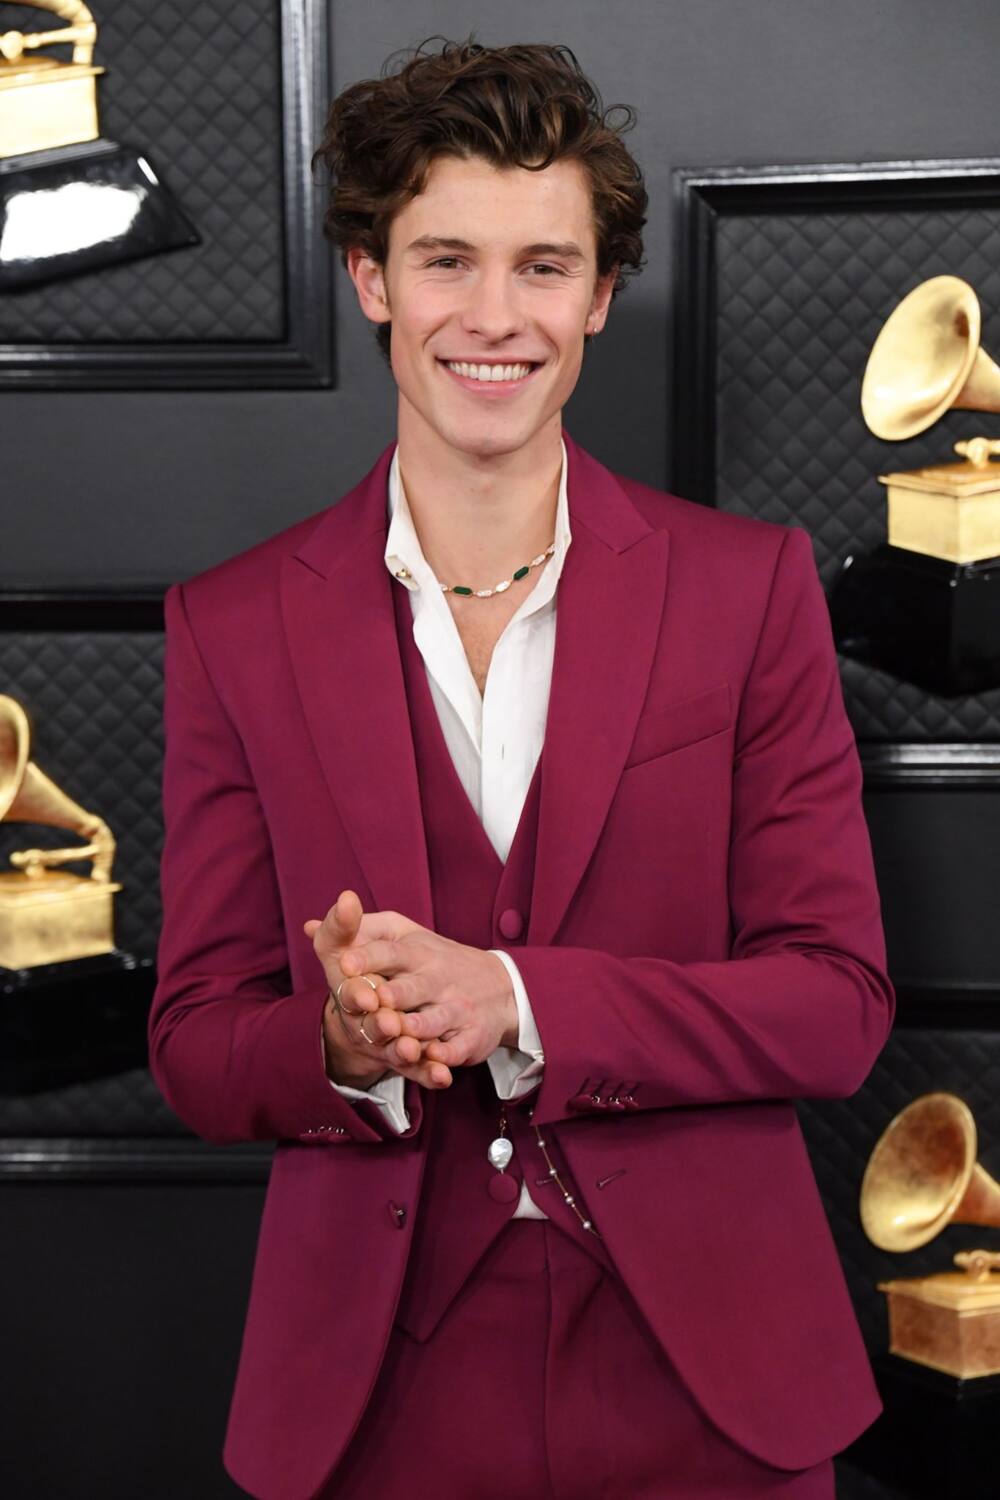 Shawn Mendes' net worth, age, girlfriend, breakup, movies, awards, profiles